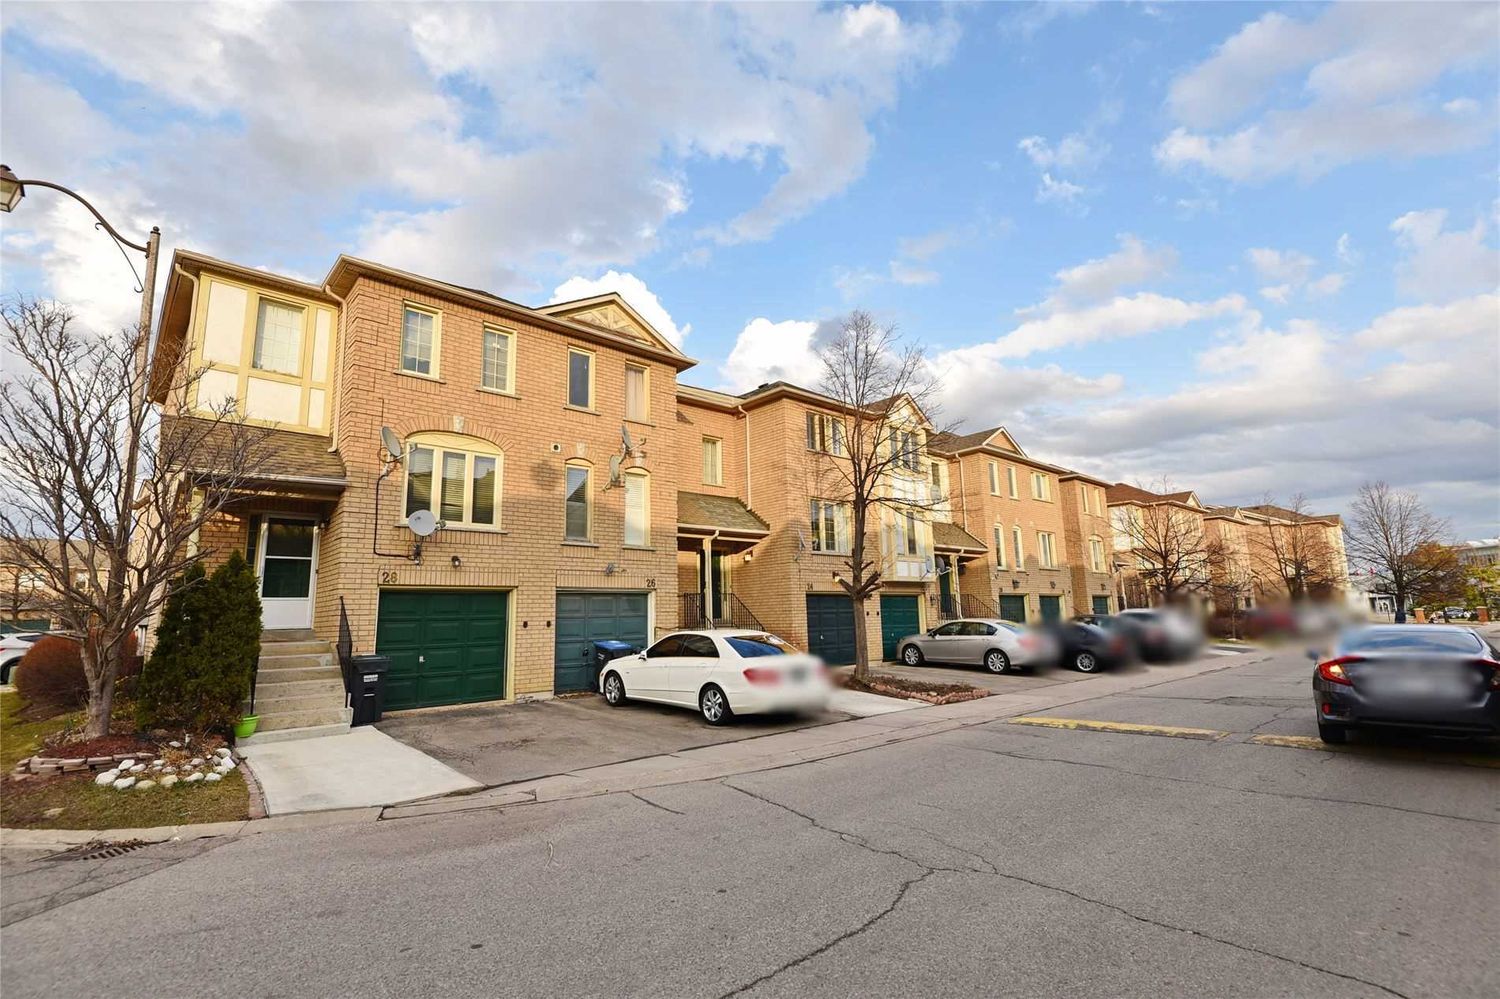 2 Sir Lou Drive. 2 Sir Lou Drive Townhomes is located in  Brampton, Toronto - image #2 of 2